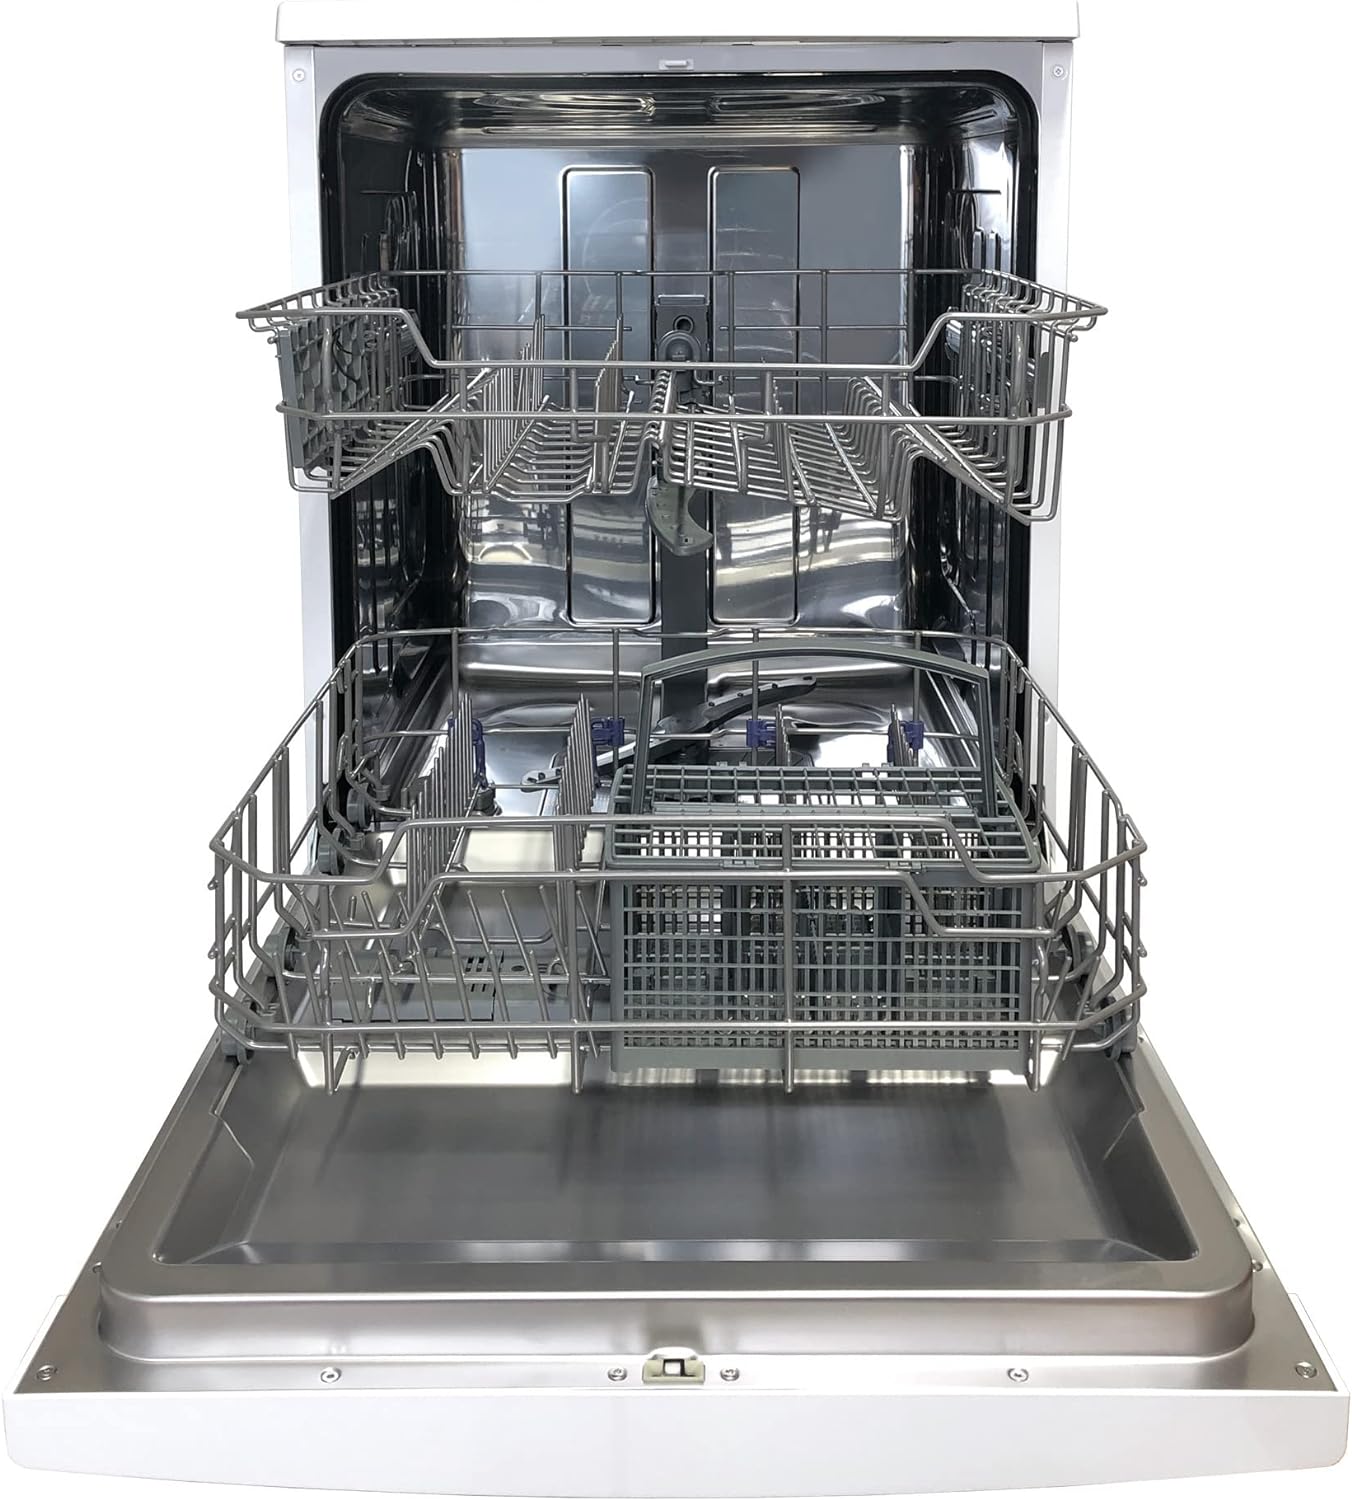 Statesman FD12PWE Freestanding 12 Place Full Size Dishwasher, Half Load Wash Function, 6 Wash Programms, Water Softness Adjustment, Cold Water Fill, 60 cm, White - Amazing Gadgets Outlet